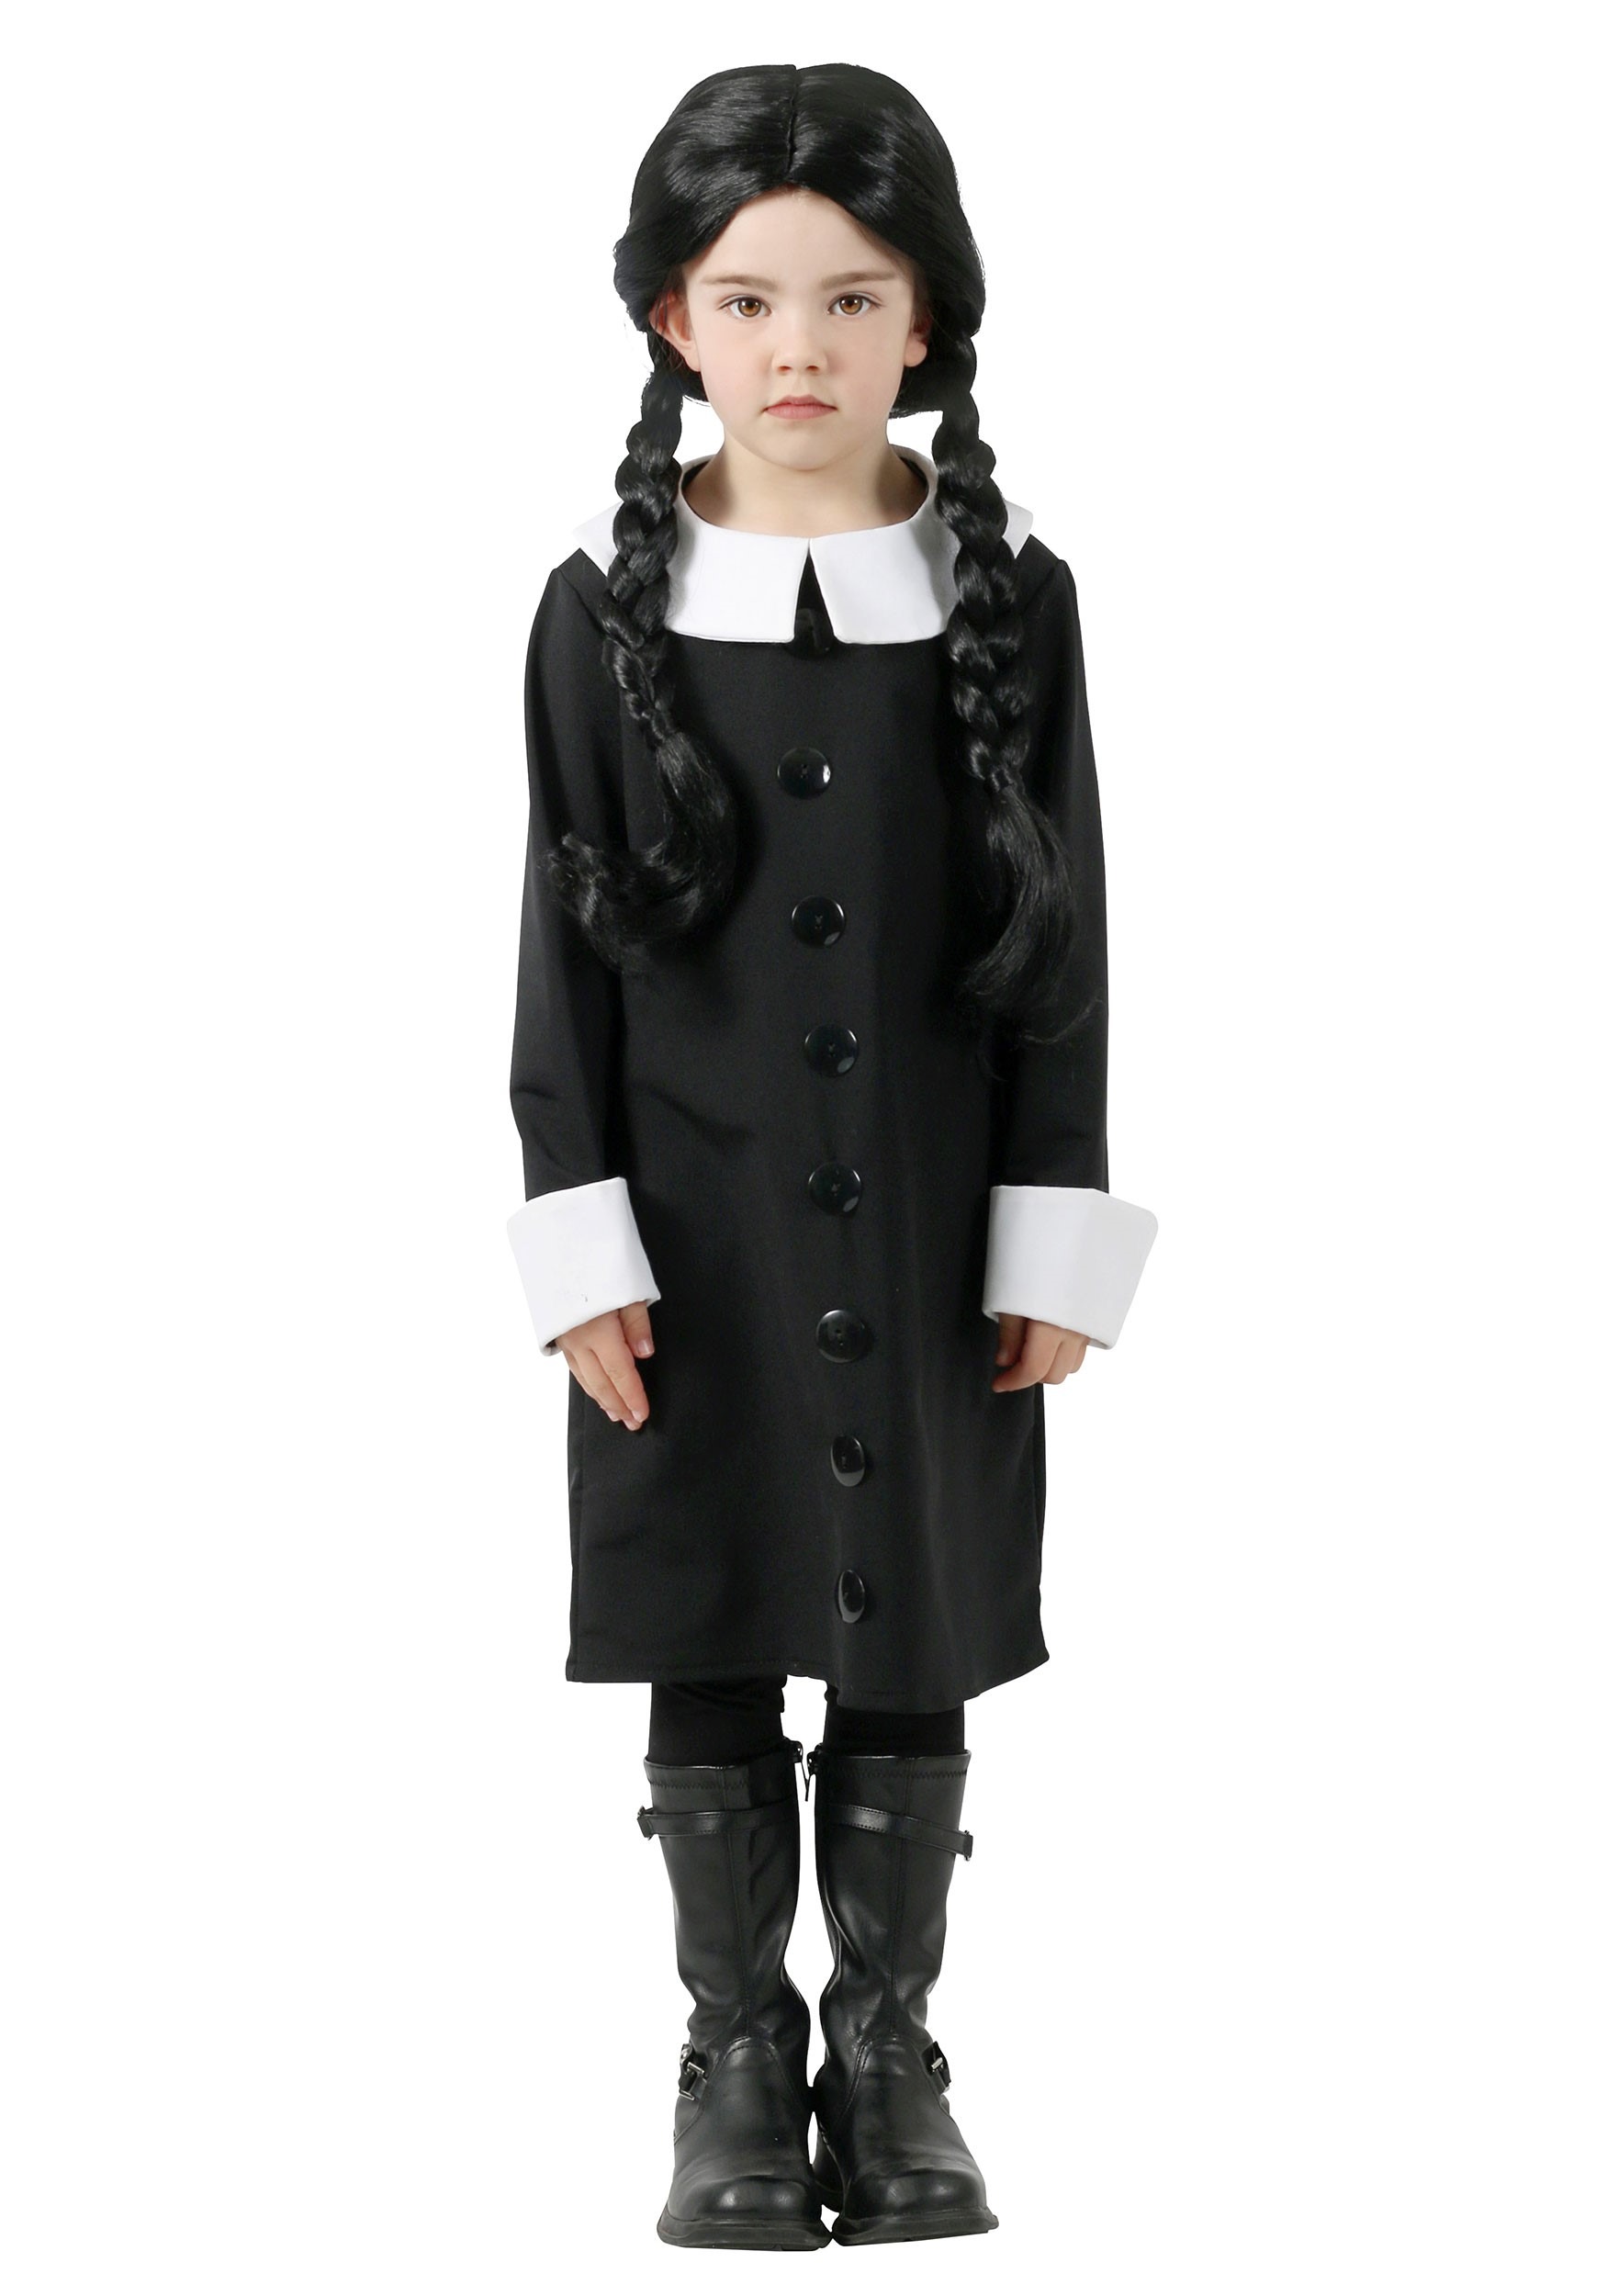 Kid's The Addams Family 2 Wednesday Costume